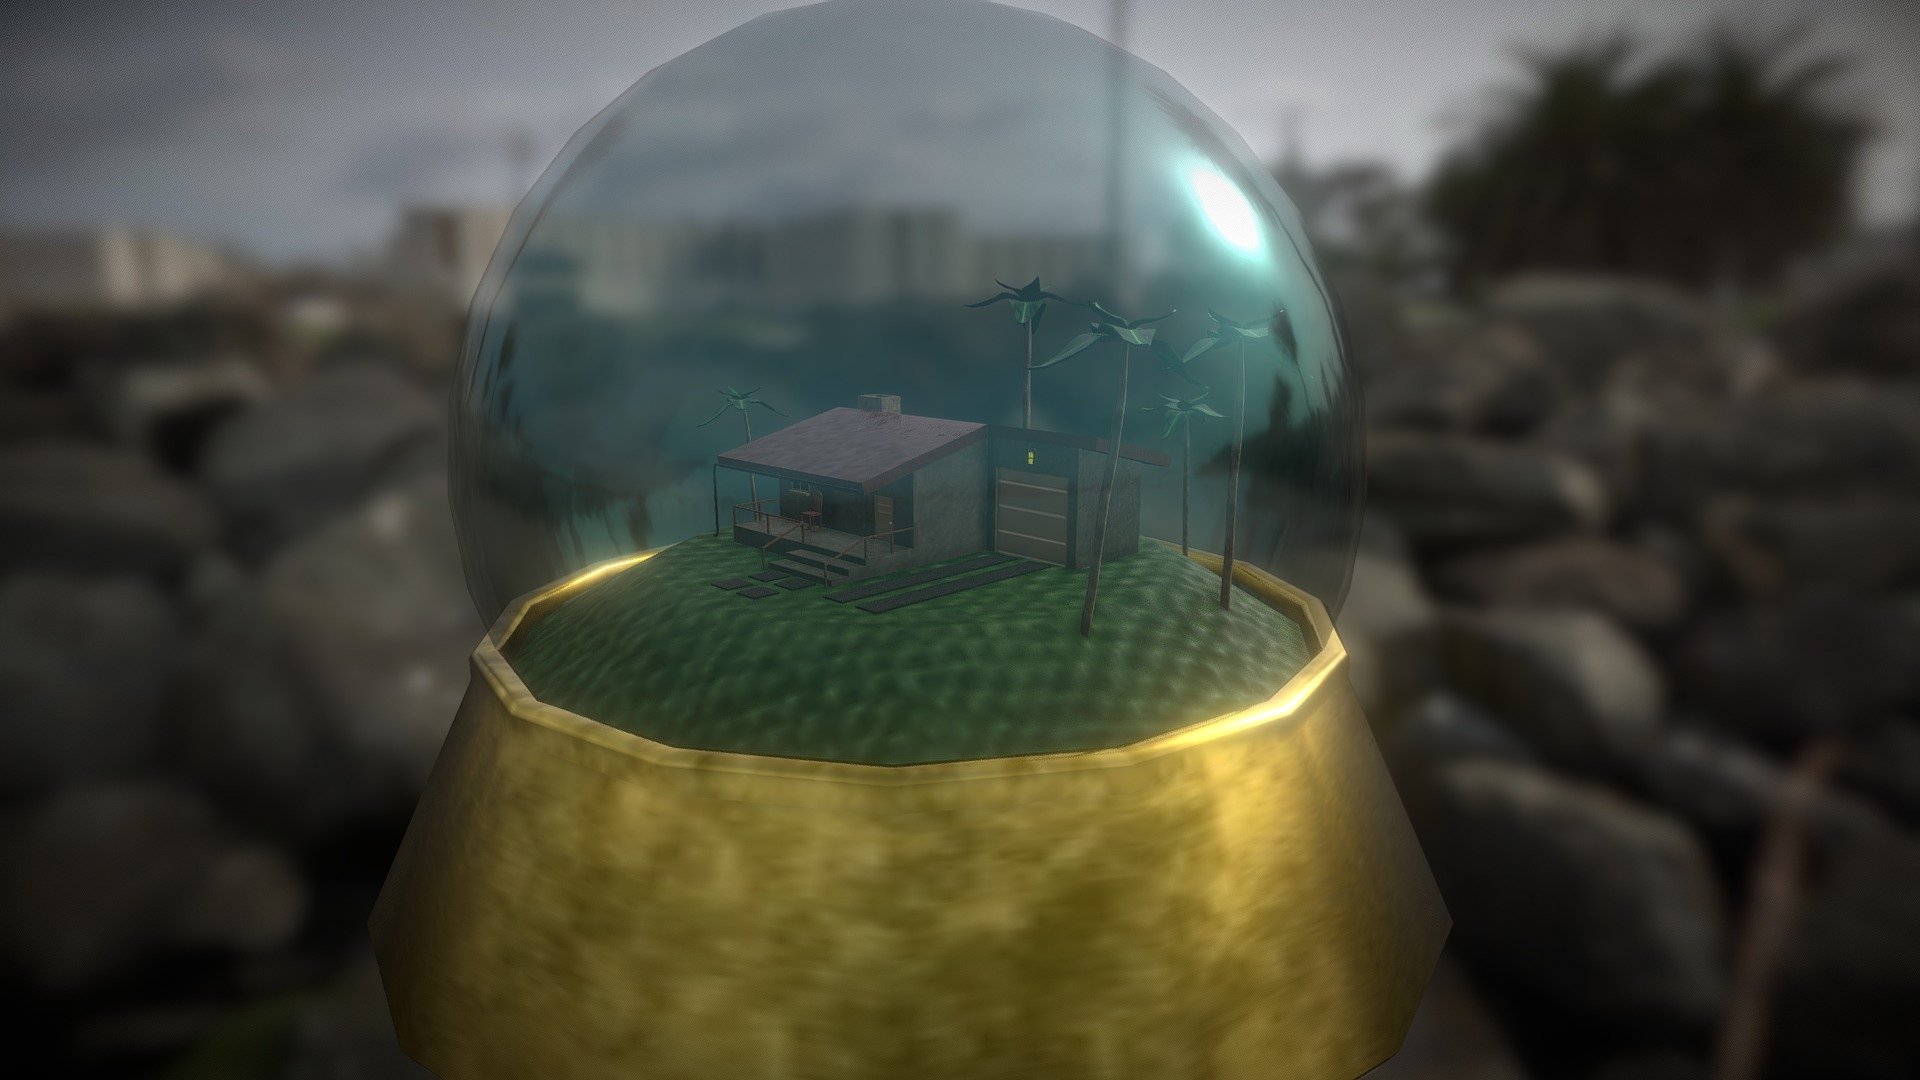 House in a Crystal Ball